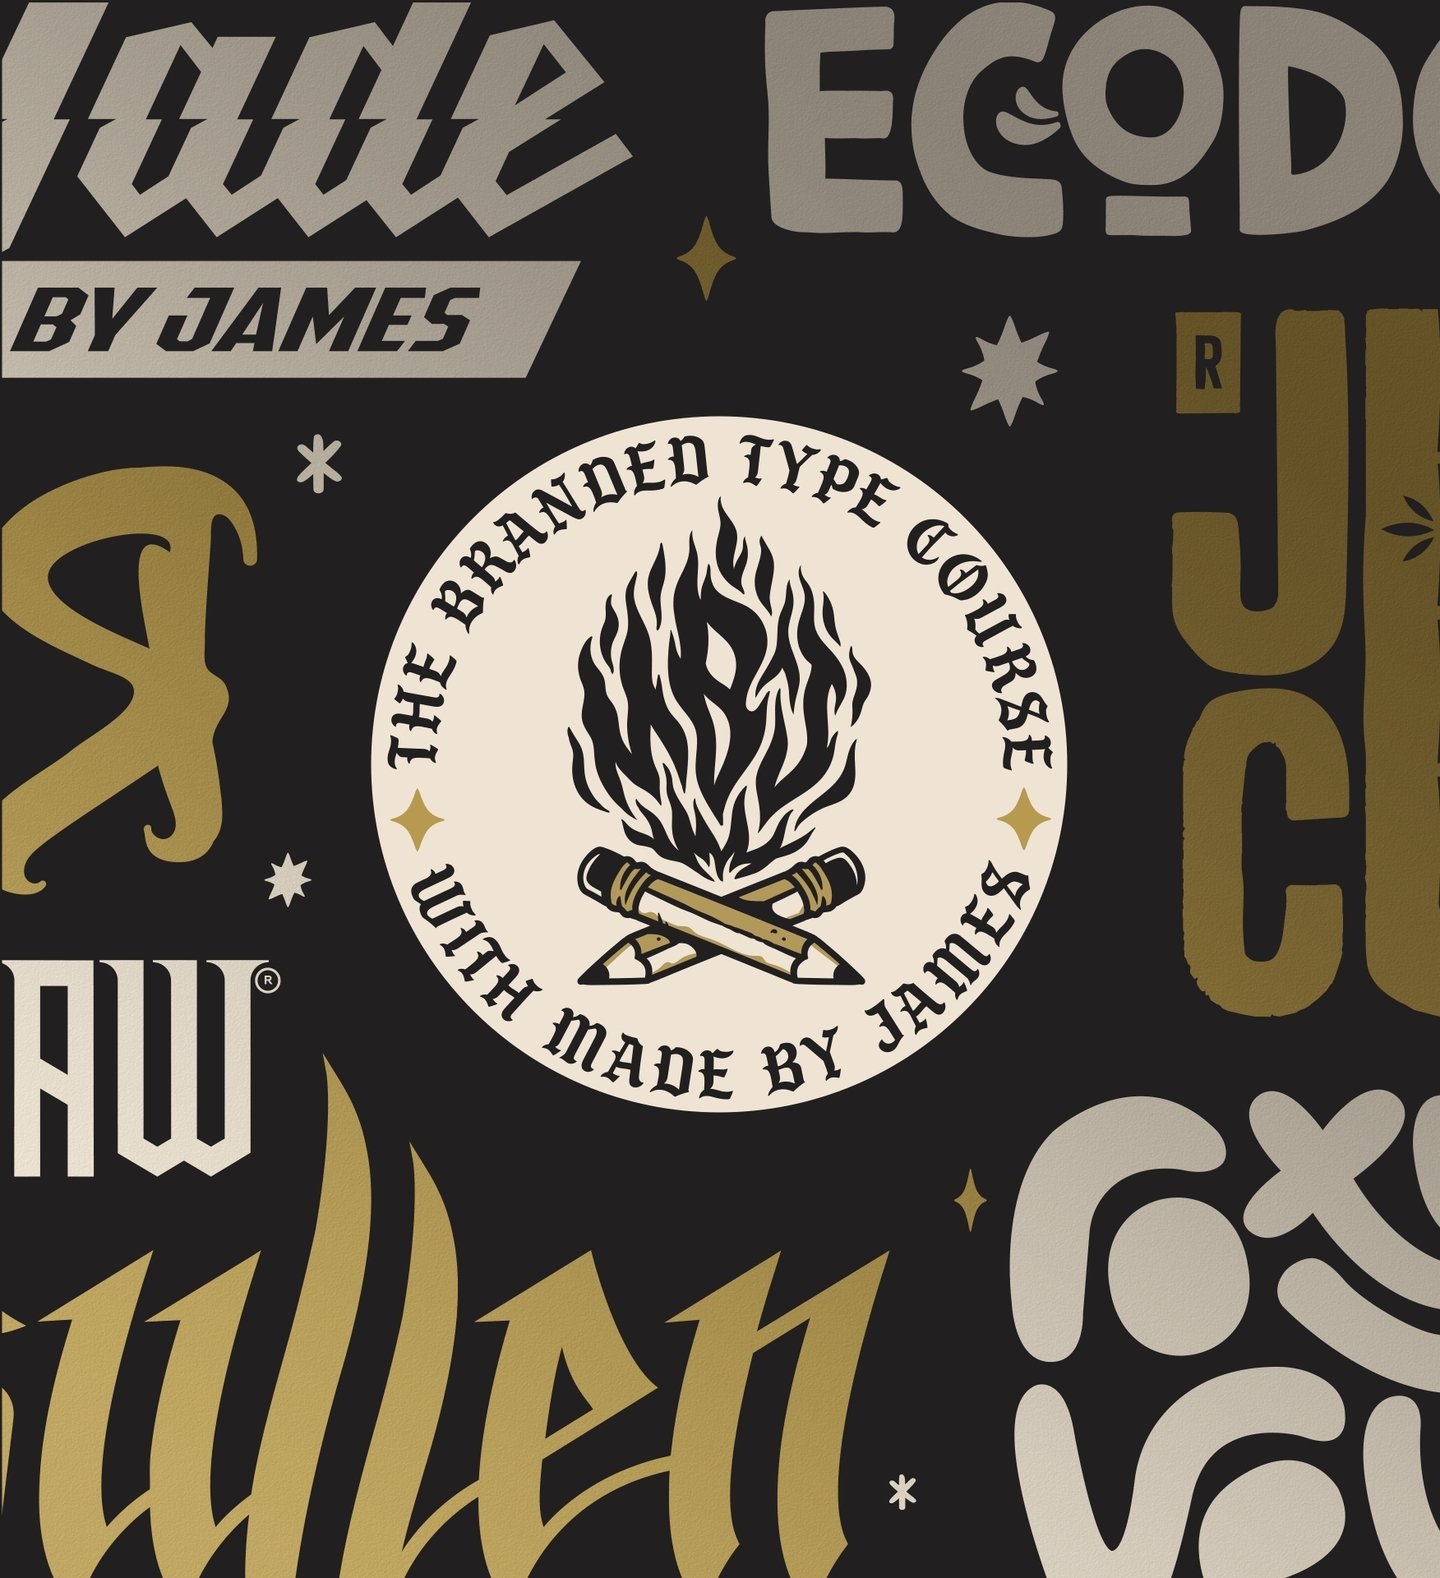 If you&rsquo;re passionate about typography and branding, @made.by.james NEW The Branded Type course is for you.

You will learn how to elevate your custom-type skills, from typographic principles to licensing.

Walk away with the understanding of ho